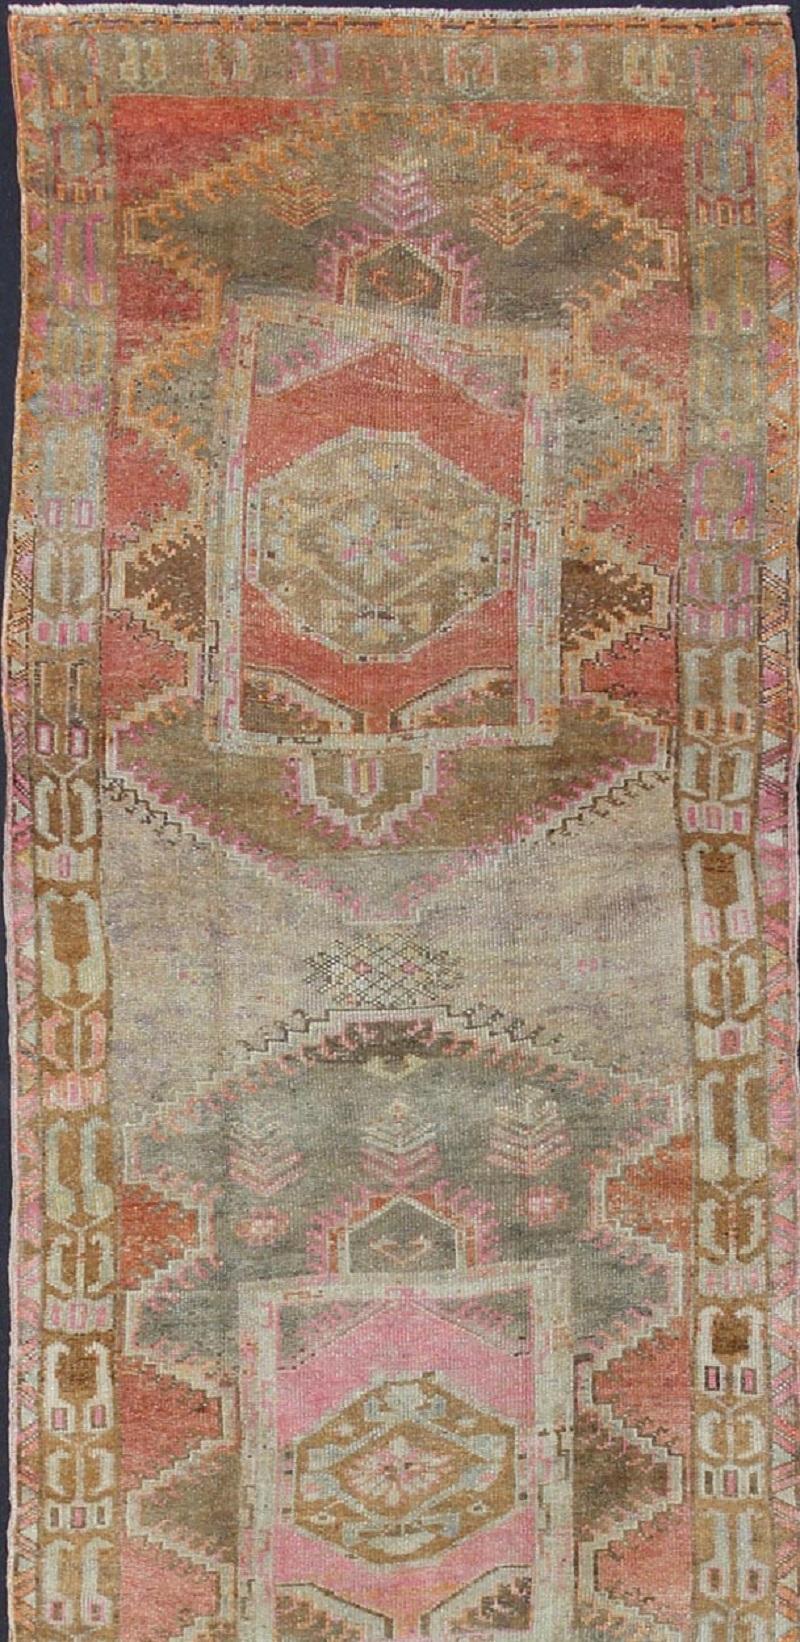 Hand-Knotted Beautiful Vintage Oushak Gallery Rug from Turkey with Tribal Design